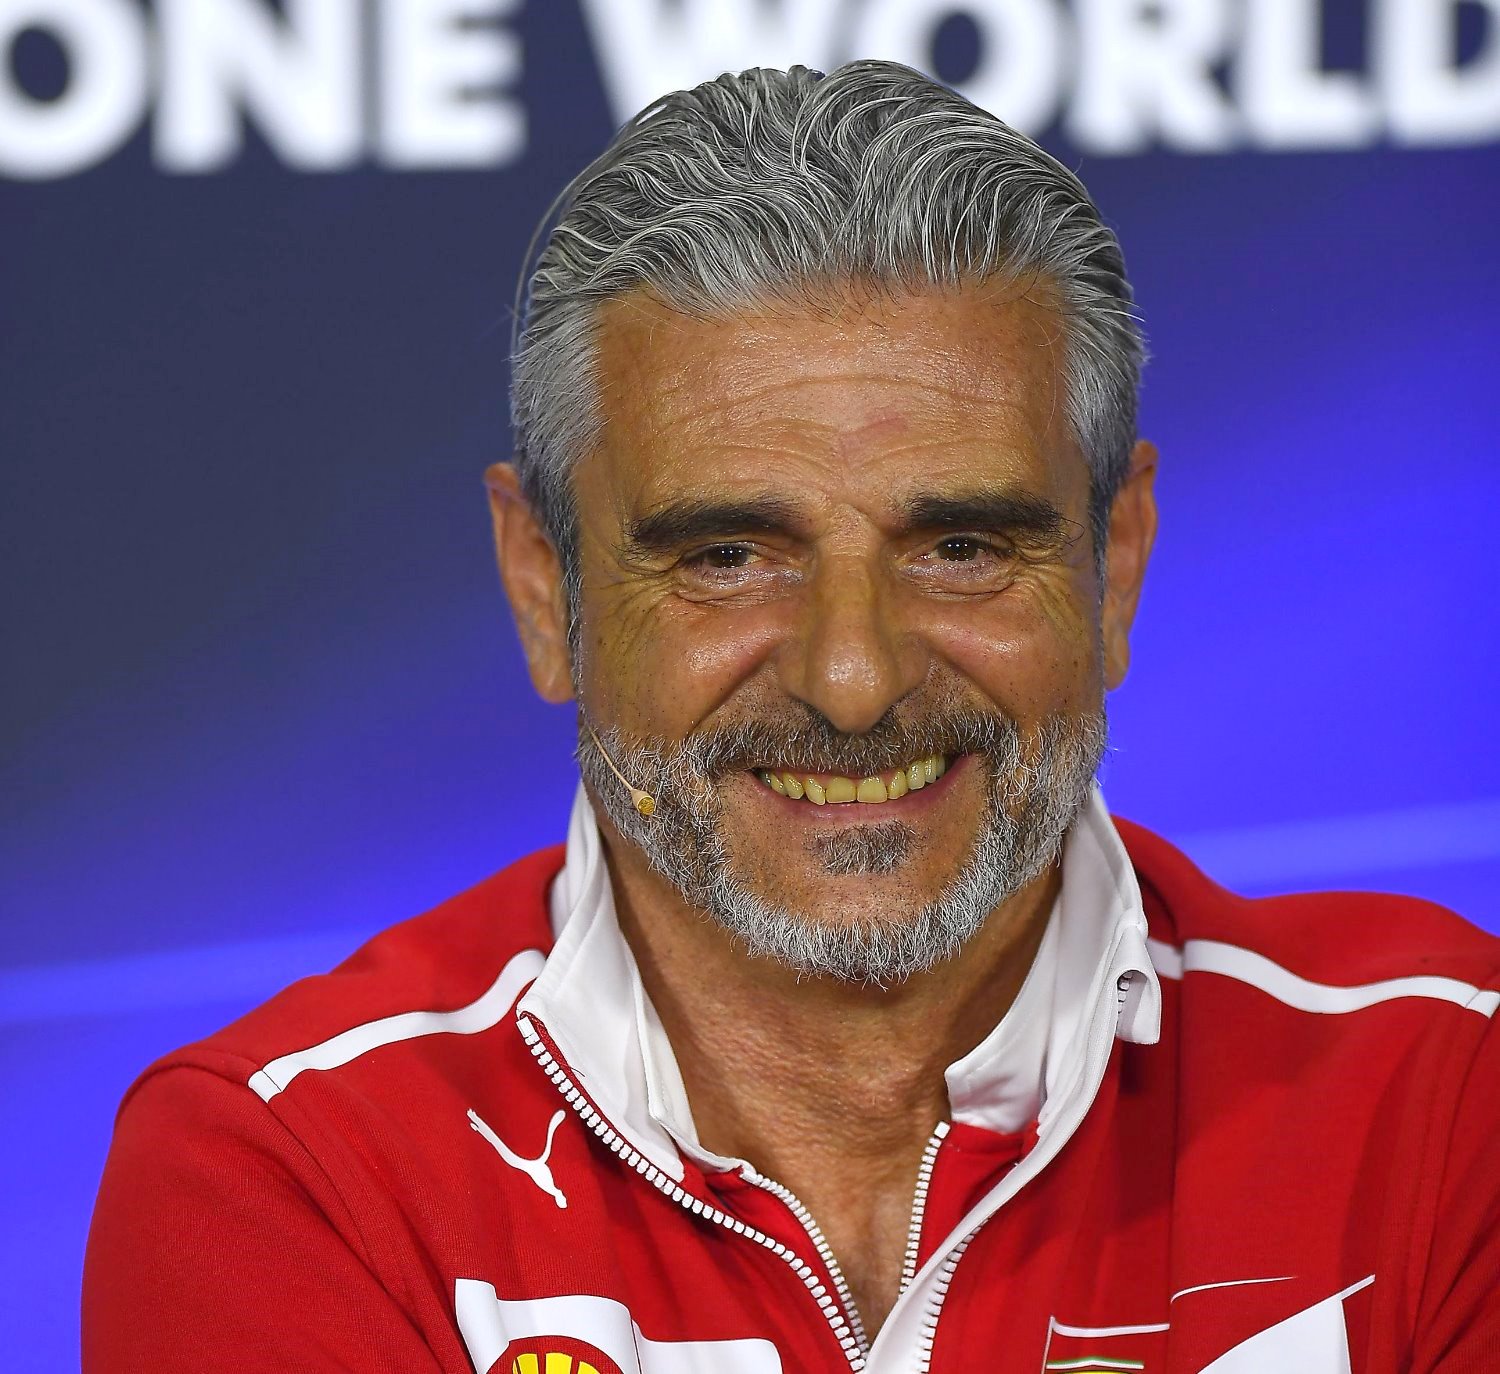 Arrivabene answers questions and jokes with media